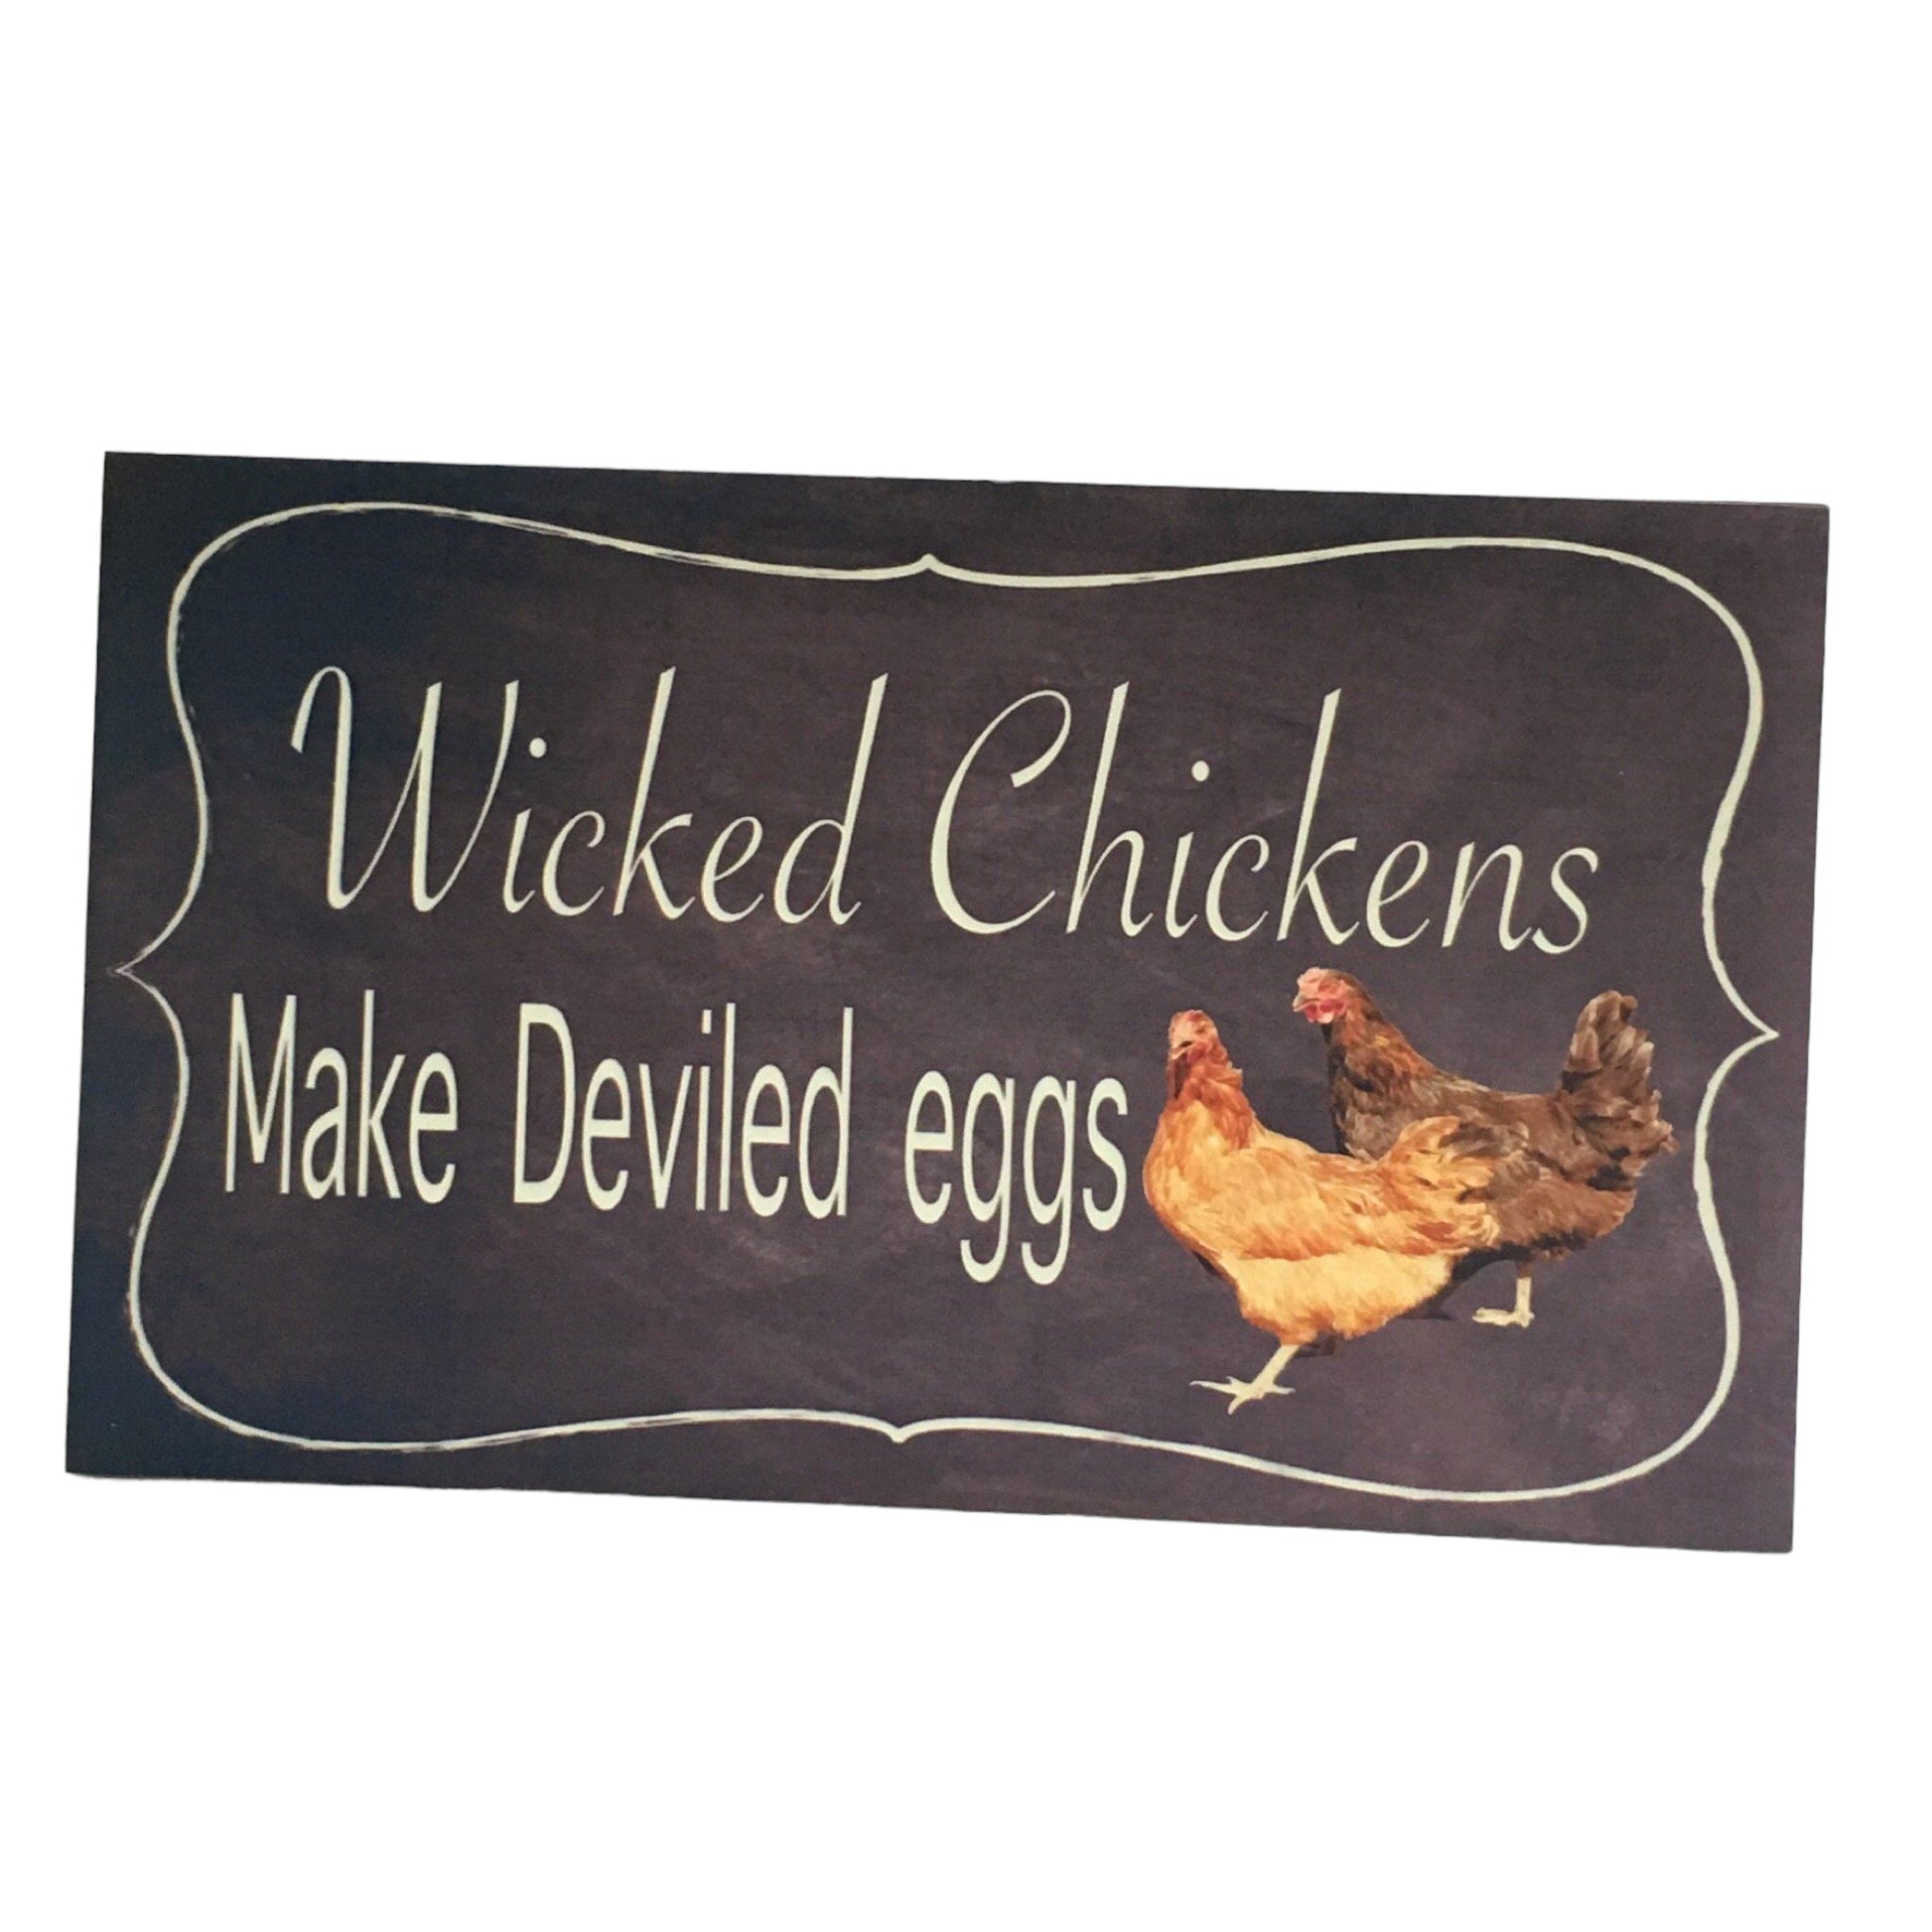 Wicked Chickens Make Devilled Eggs Sign - The Renmy Store Homewares & Gifts 